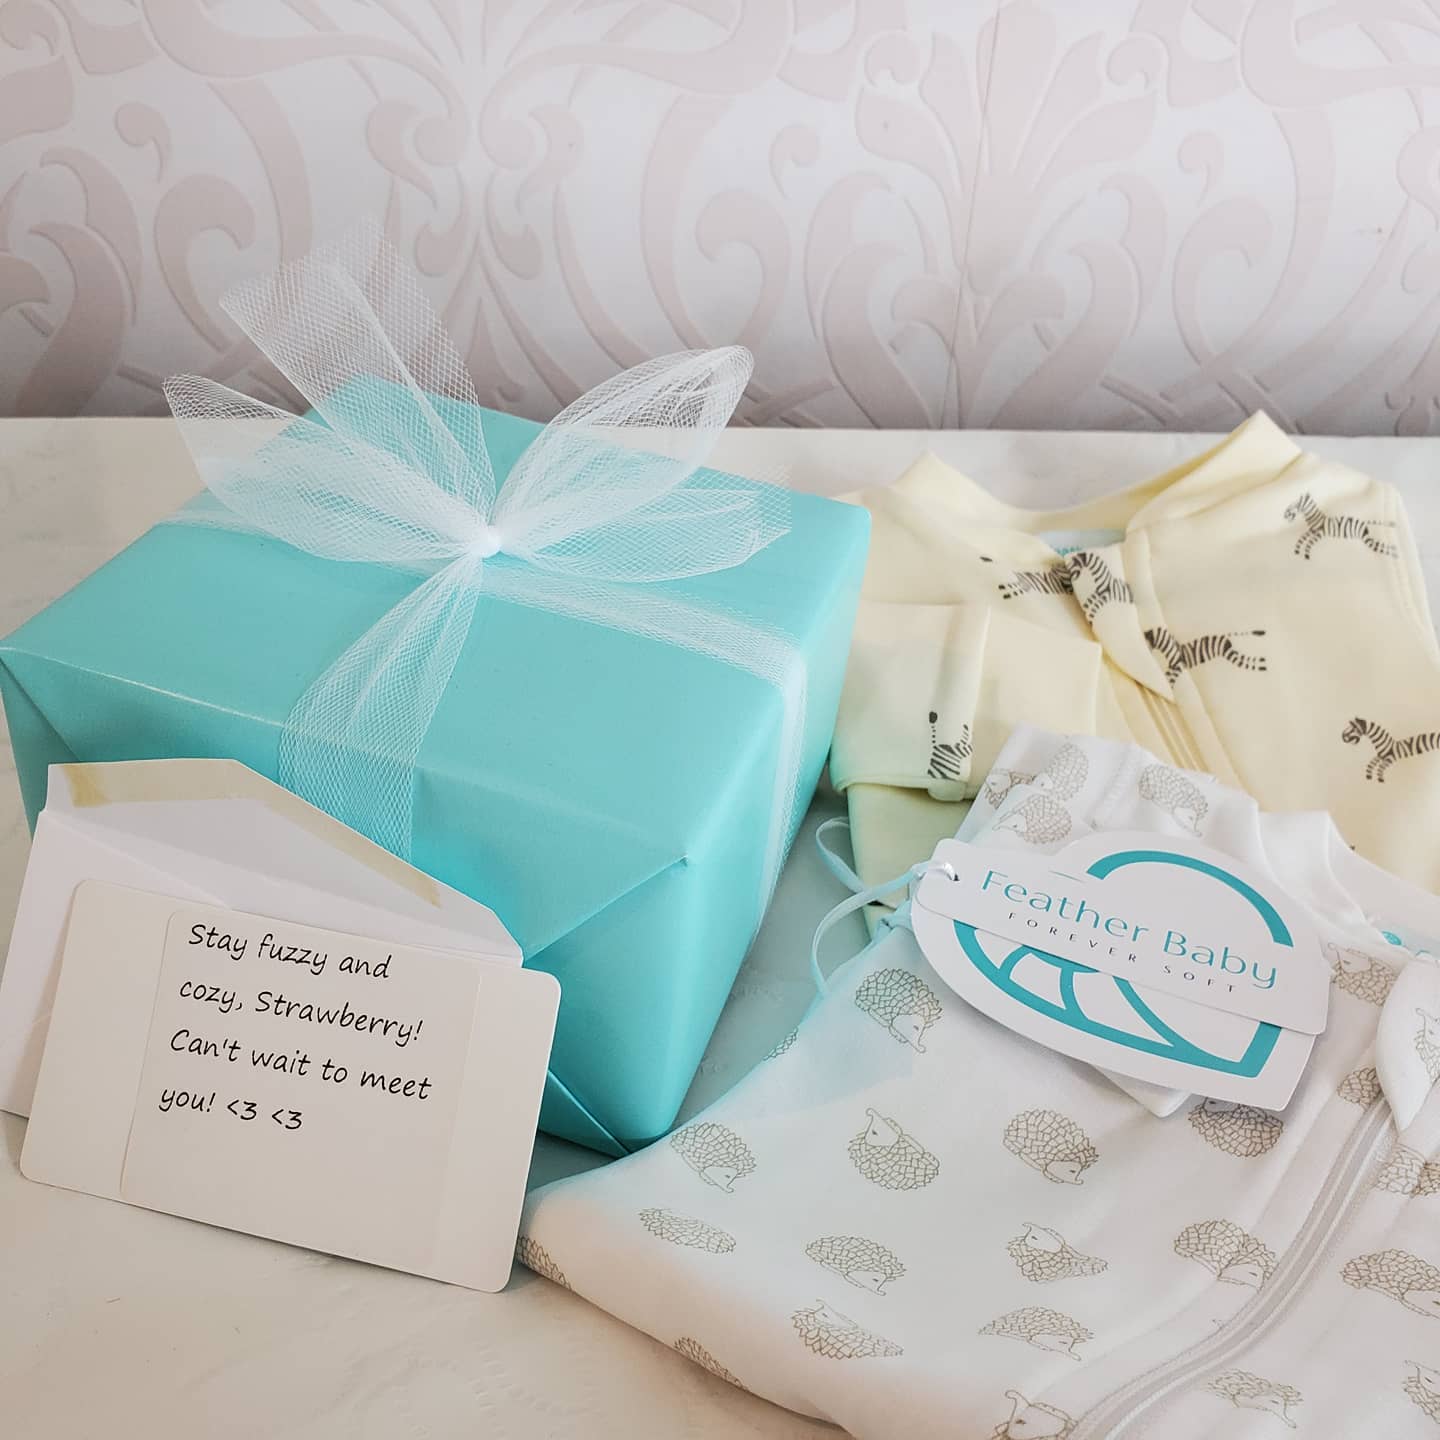 8 tips to guide you in your baby gift shopping